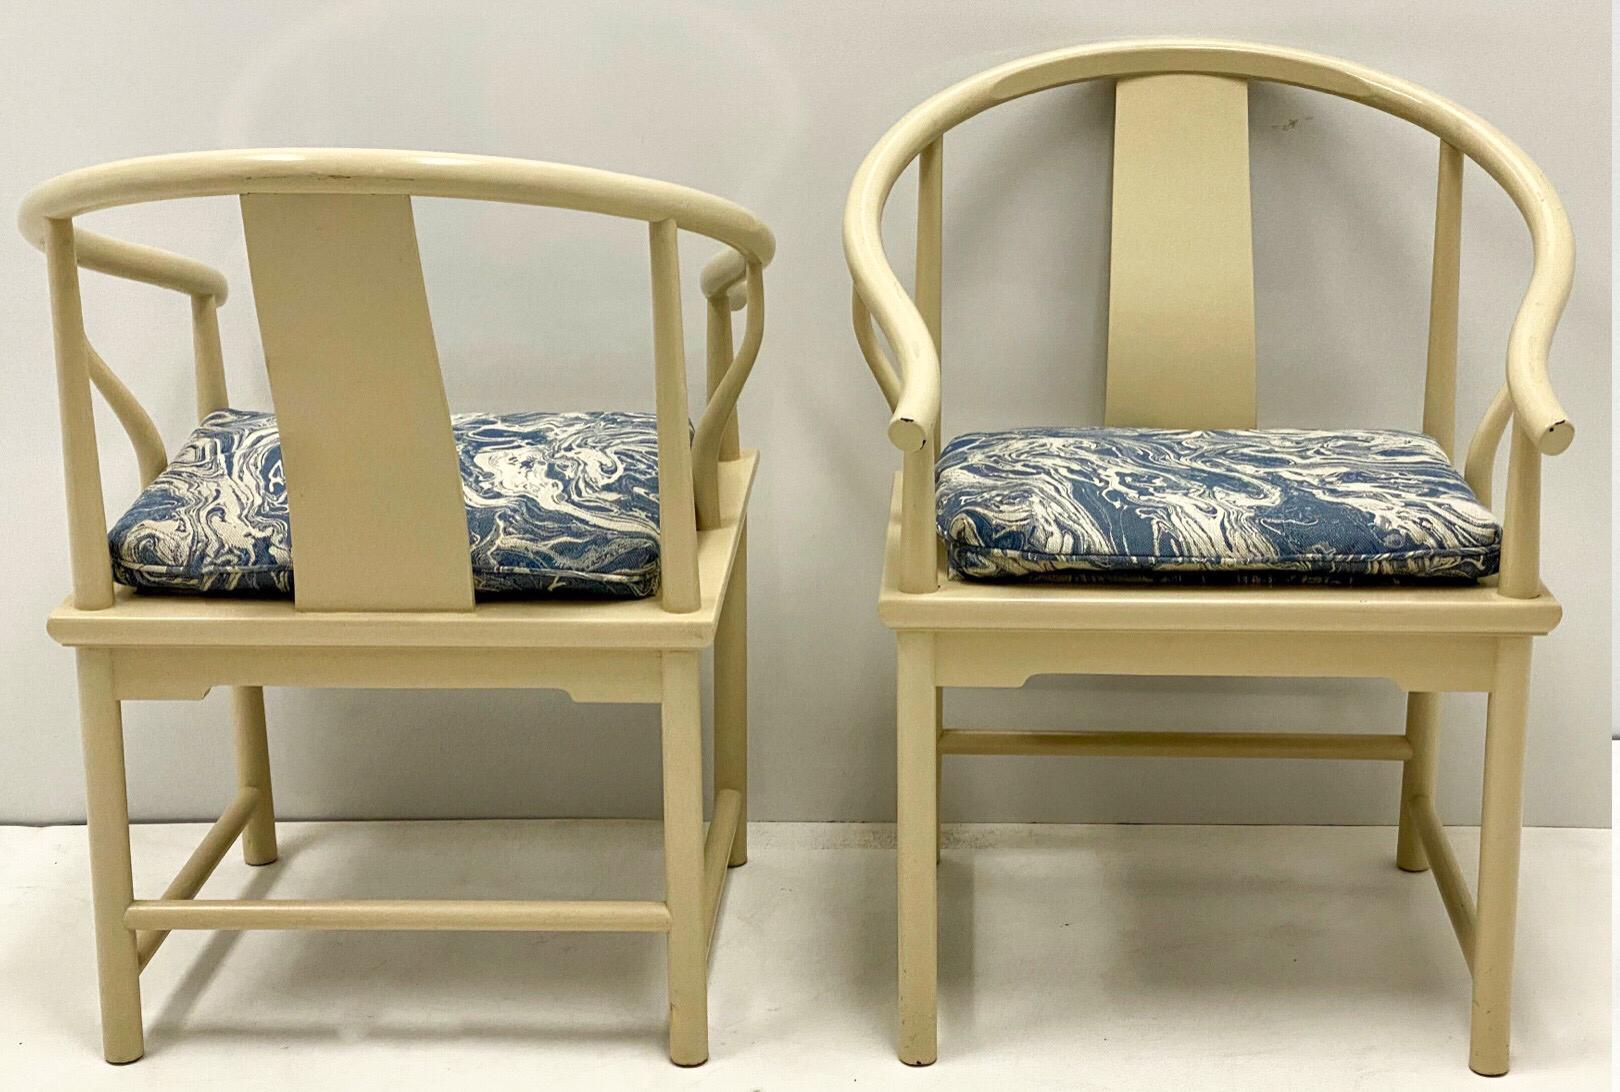 American 1970s Ming Style Arm Chairs by Baker Furniture Company, Pair